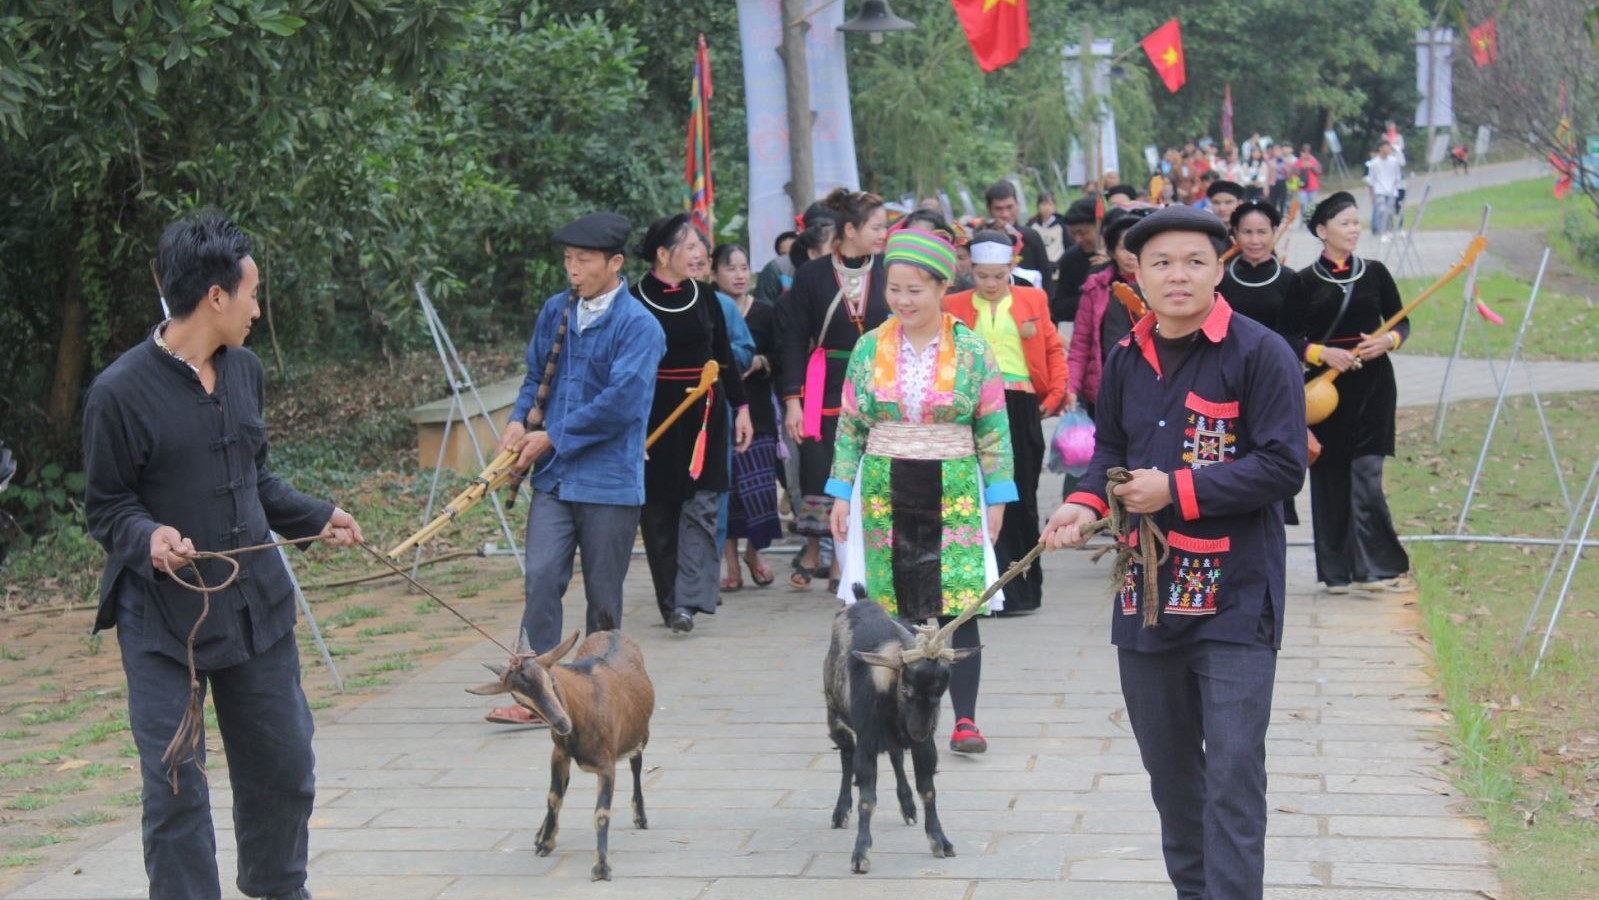 Ethnic minority groups celebrate New Year with various activities